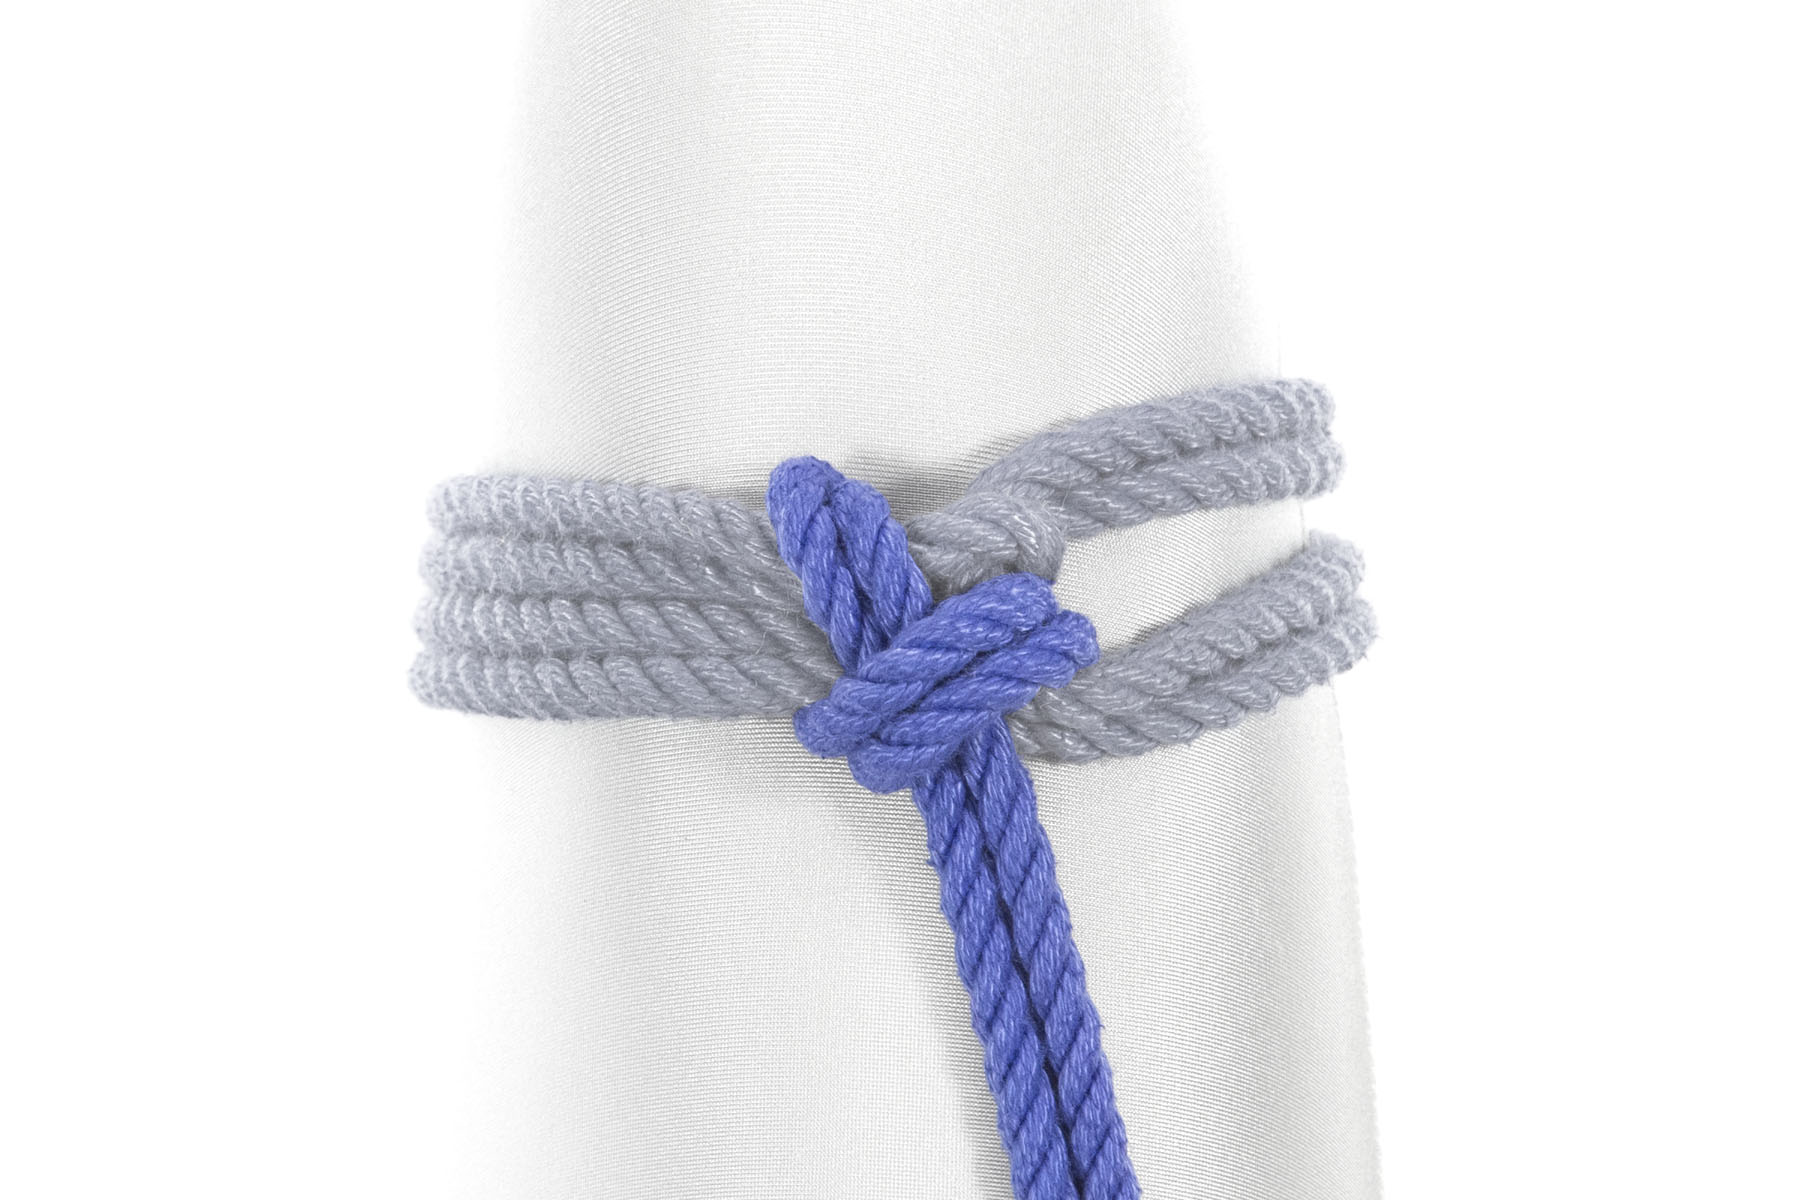 The rigger has snugged the single column tie by pulling on the working end, collapsing the triangle into a half hitch knot.